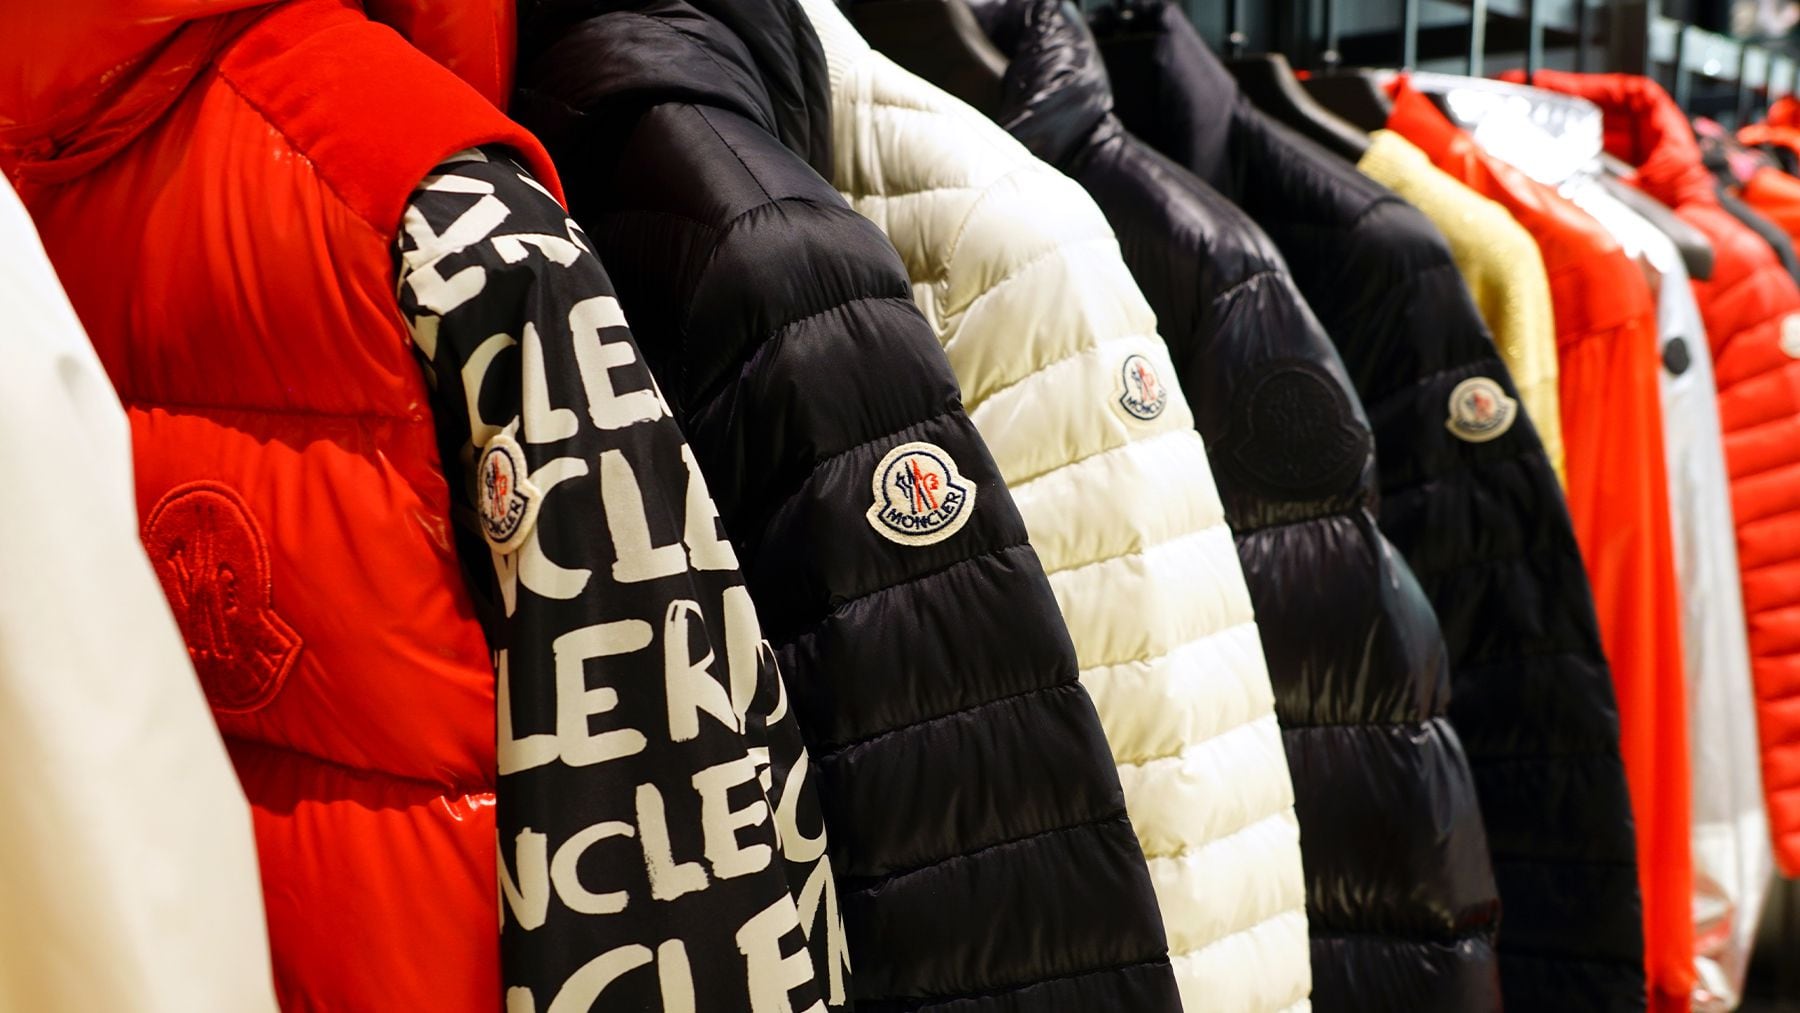 Sales at Italy’s Moncler Up 16% in First Quarter Boosted by China